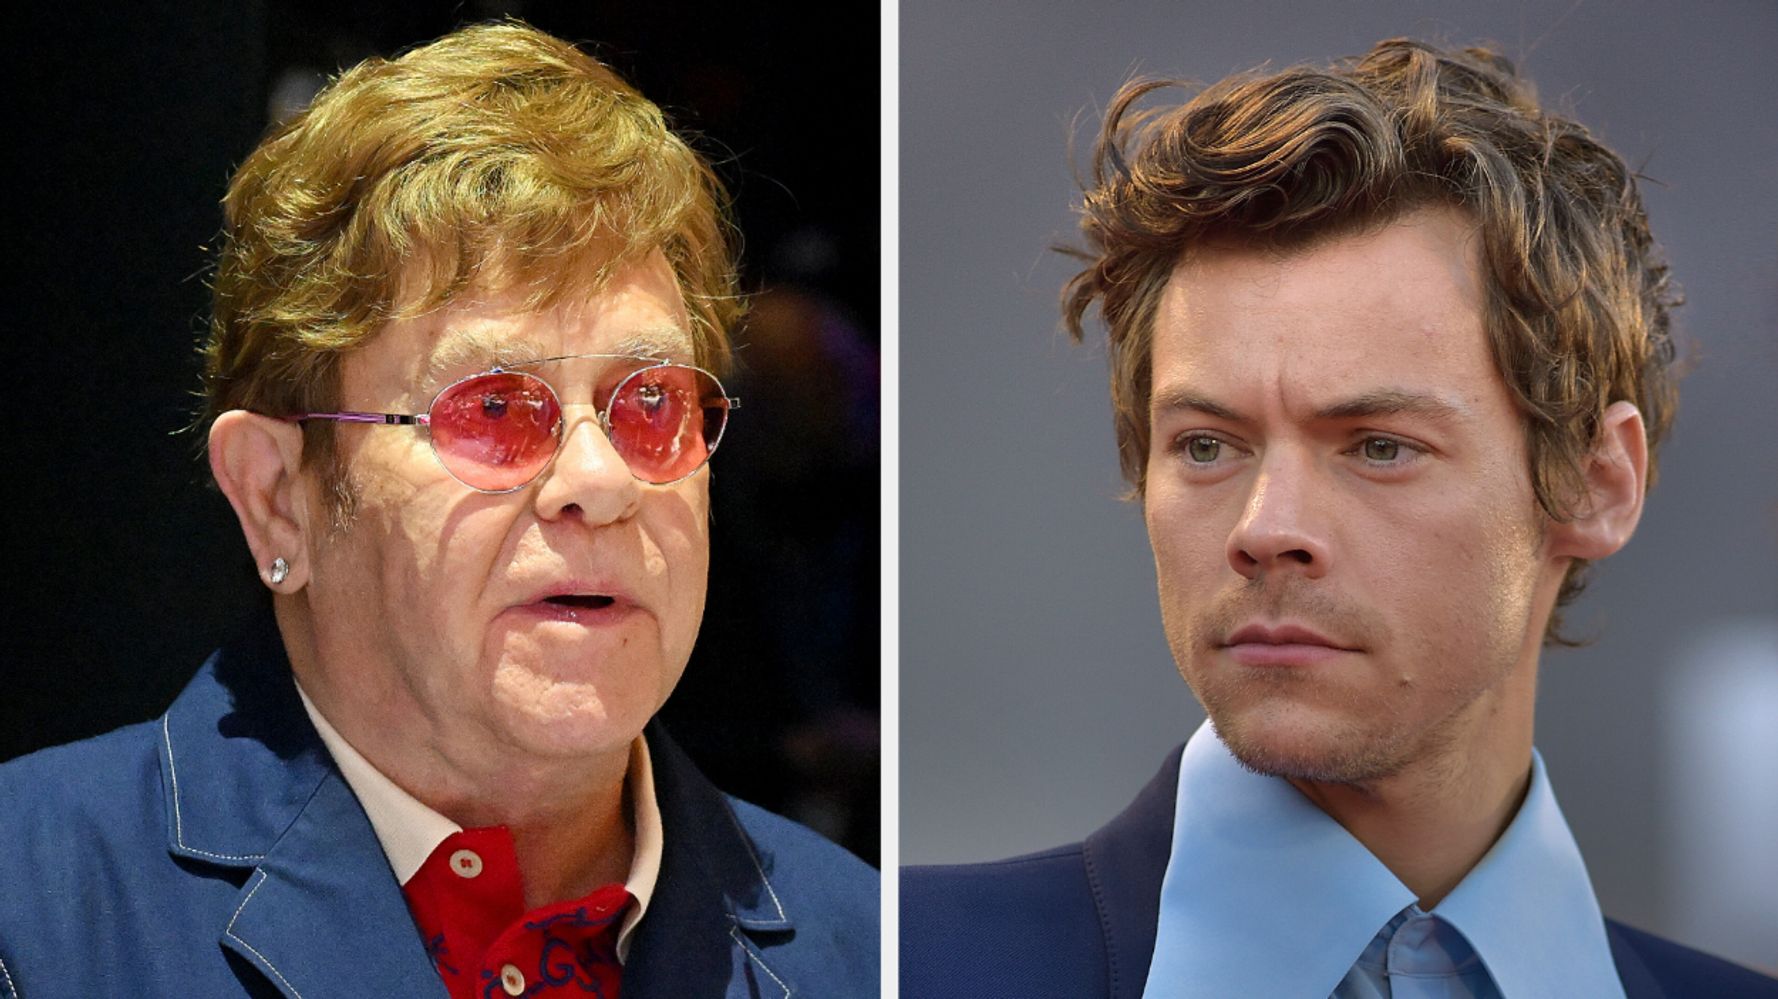 Harry Styles Dressed Up As Elton John For Halloween And It Is Way